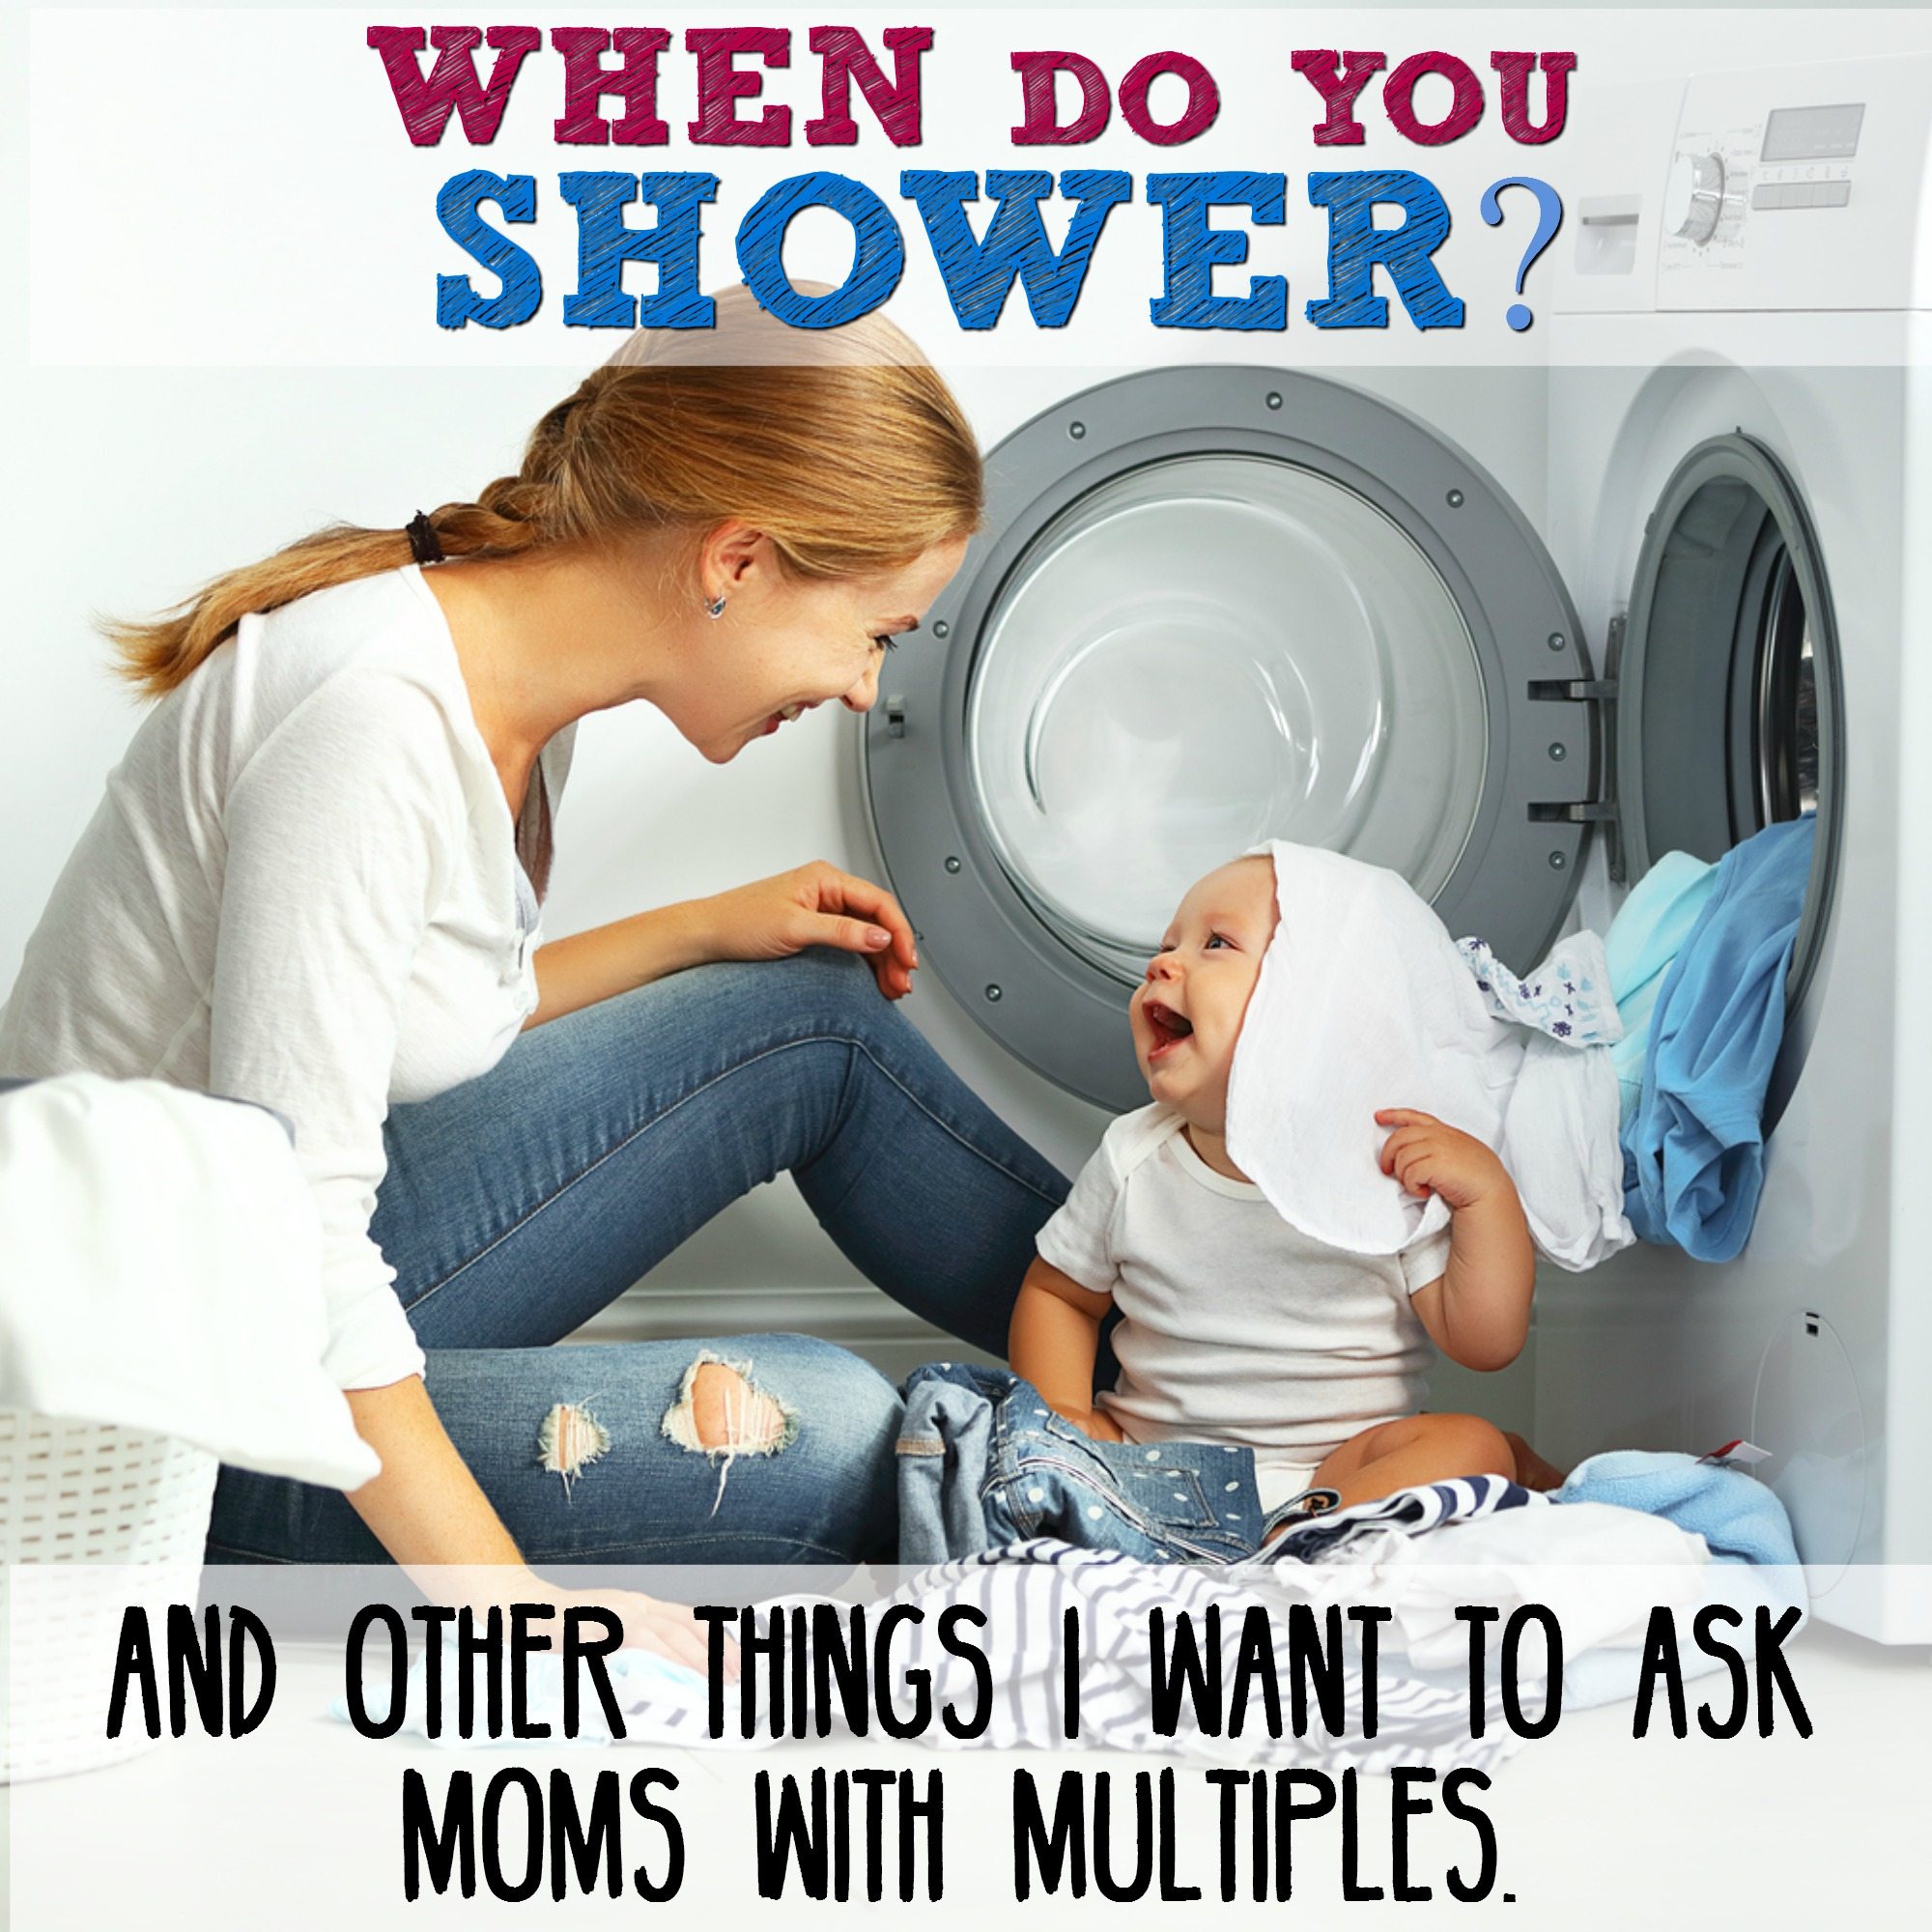 ‘When do you shower?’ and Other Things I Want to Ask Moms with Multiples